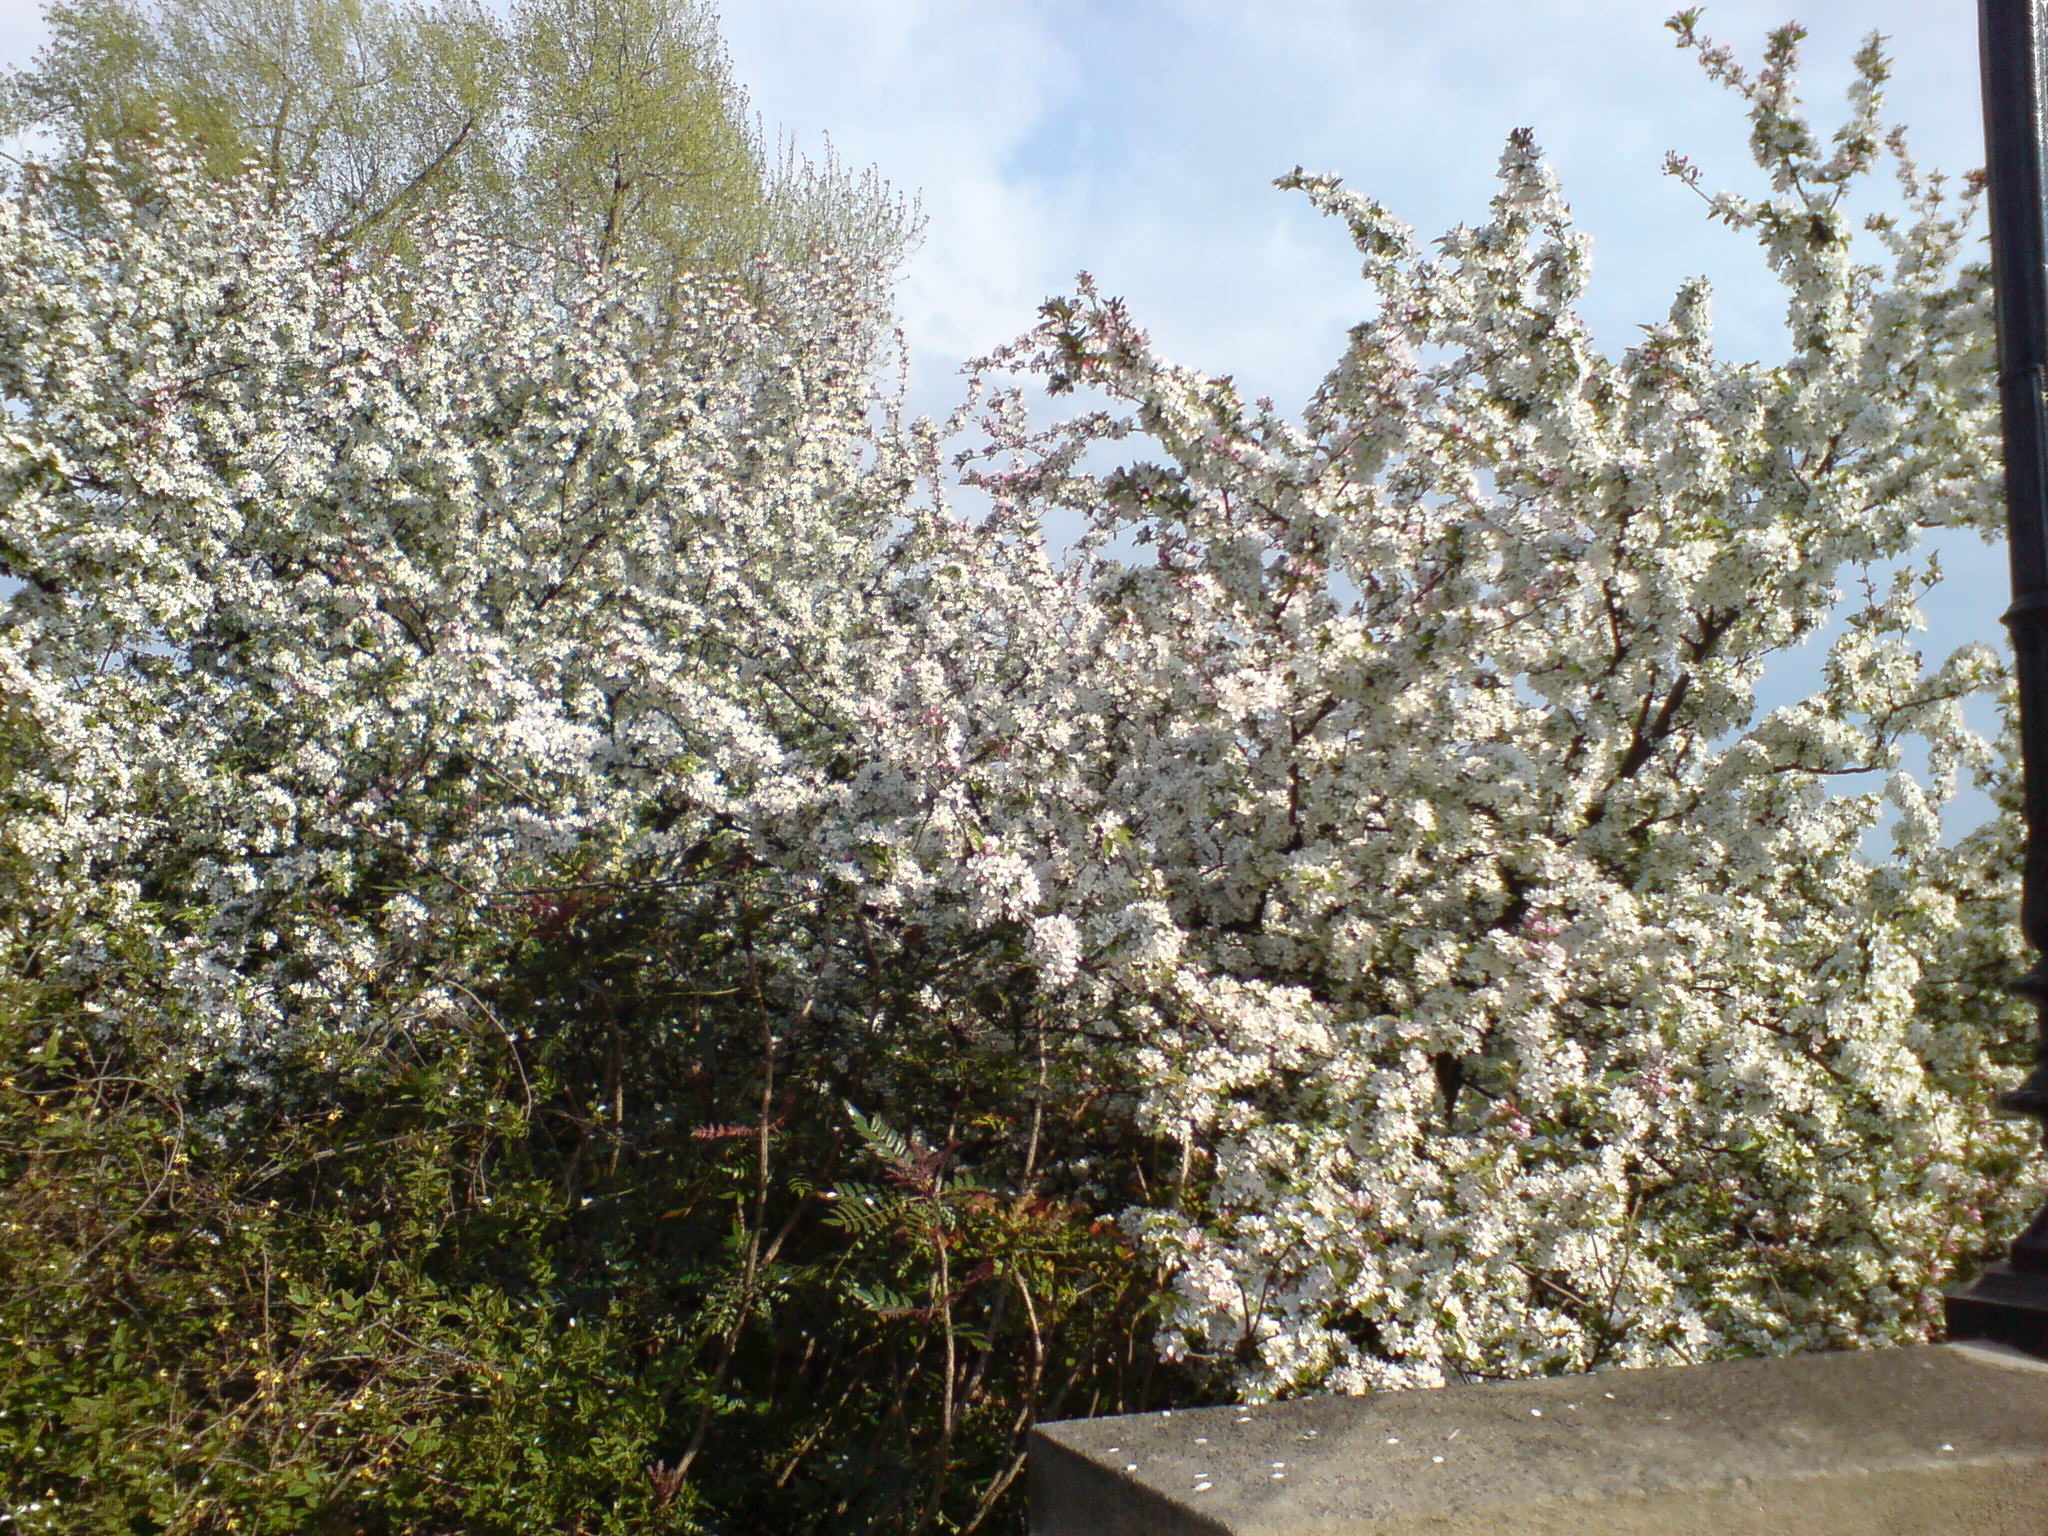 a flowering tree in an outdoor flower bed next to shrubs